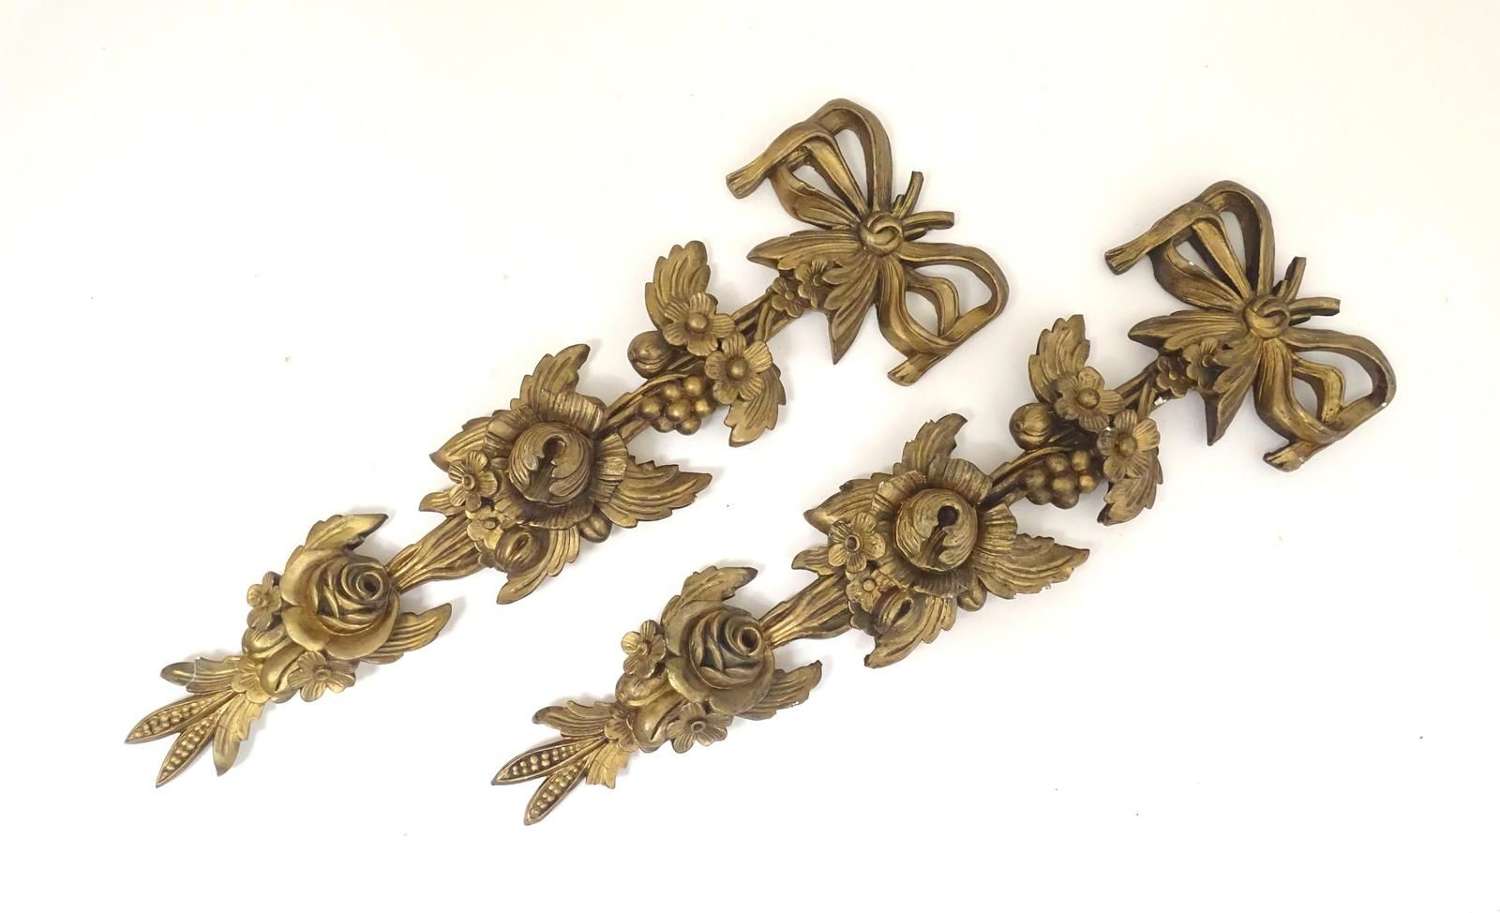 Pair of Early 20th Century Gilt Wall Appliques / Mounts